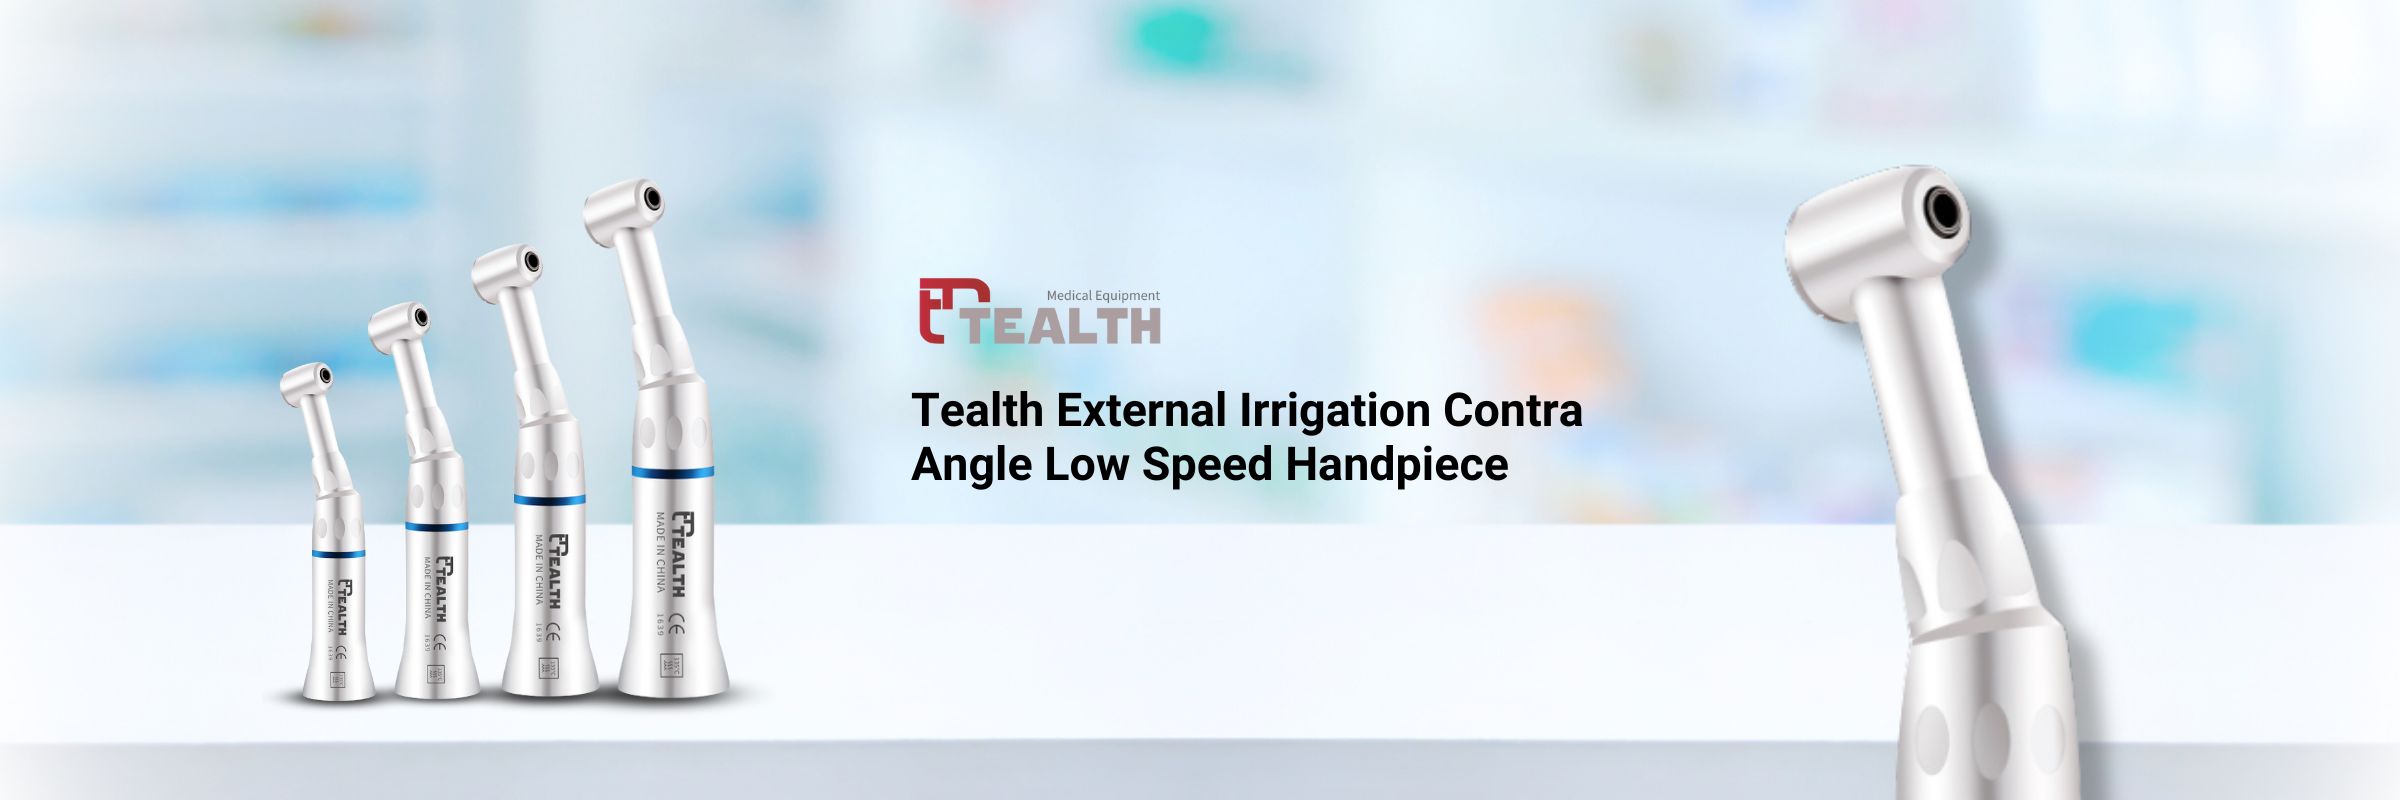 Tealth External Irrigation Contra Angle Low Speed Handpiece